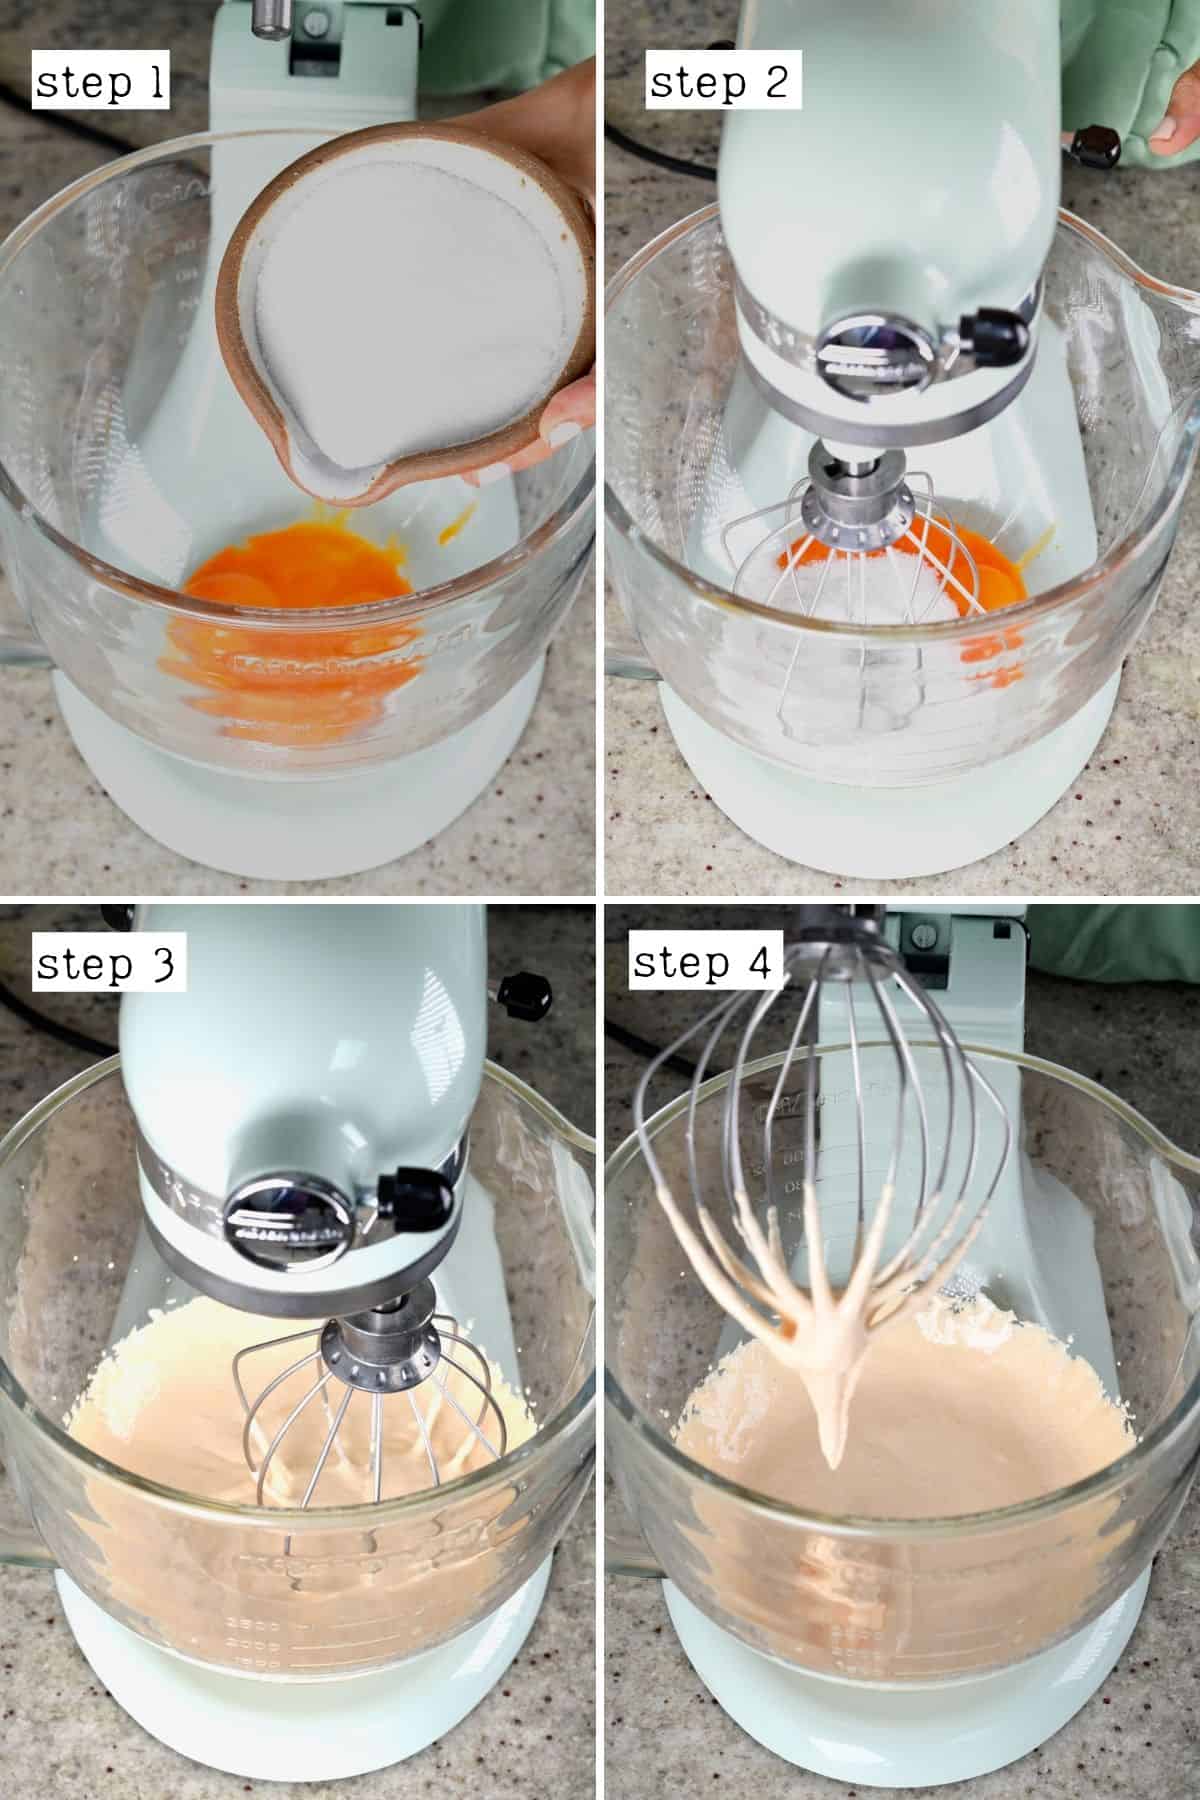 Steps for mixing yolks and sugar